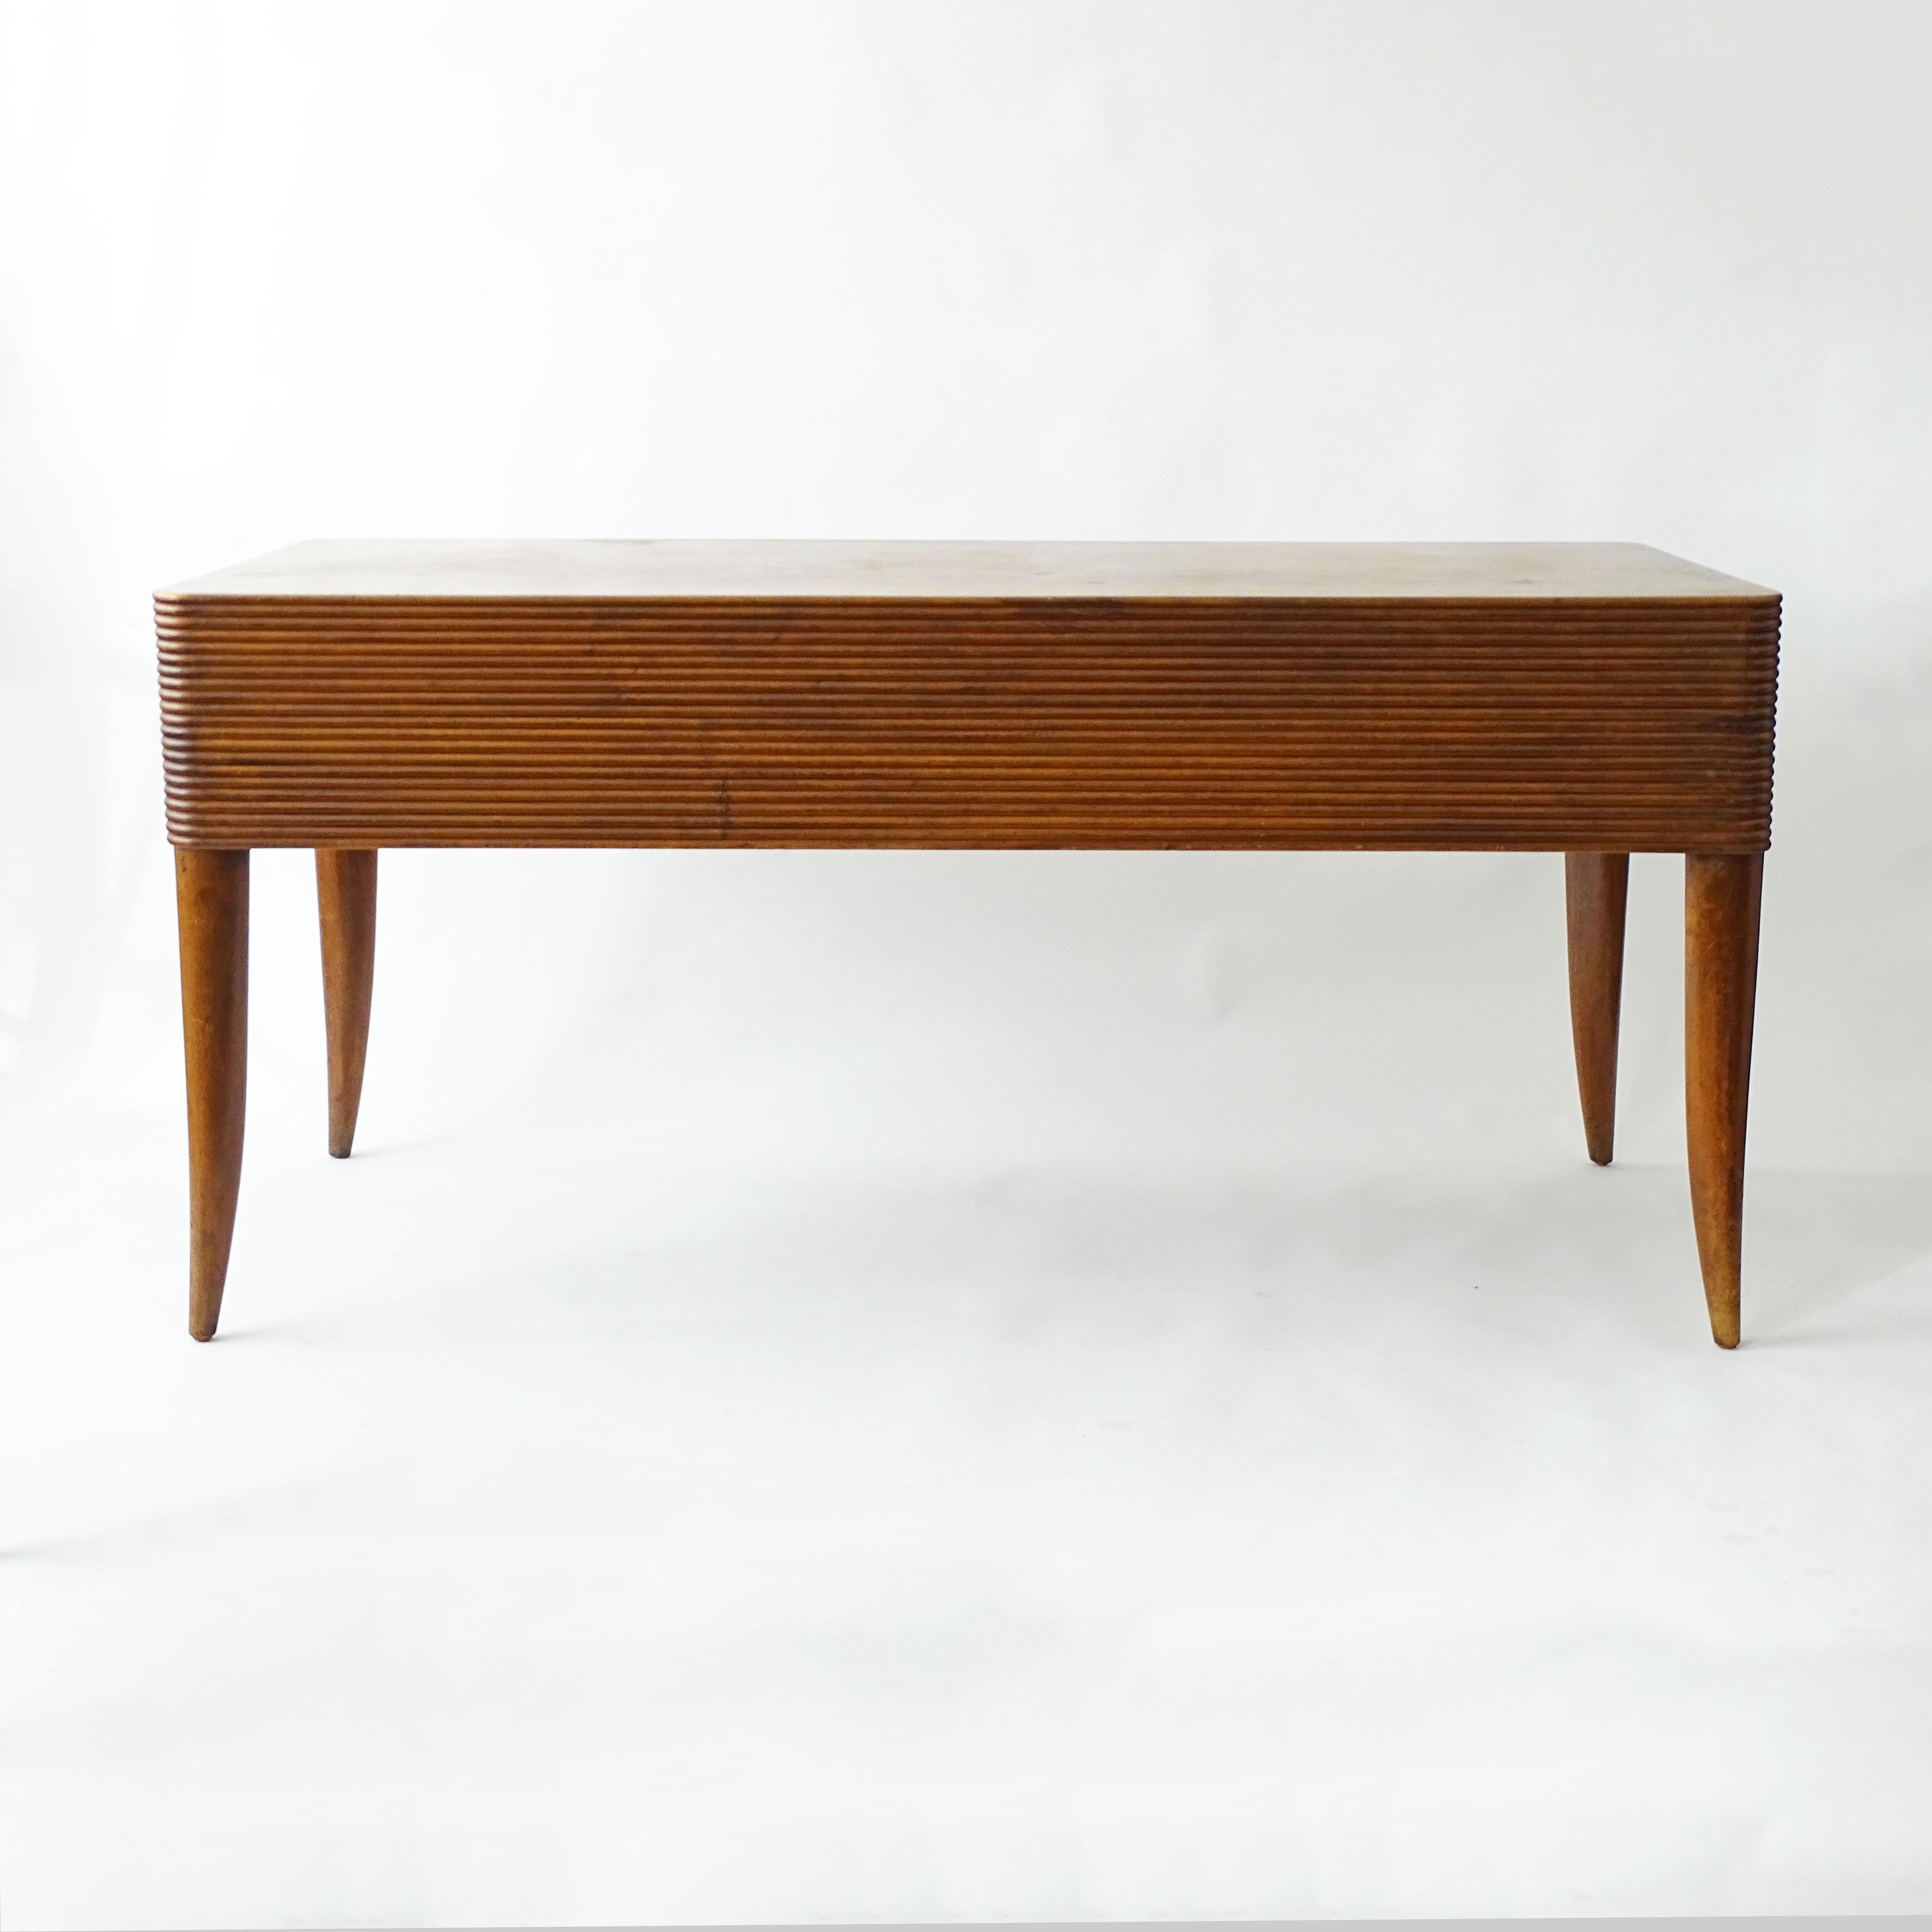 Italian Paolo Buffa grissinato wood desk with four drawers, Italy 1940s For Sale